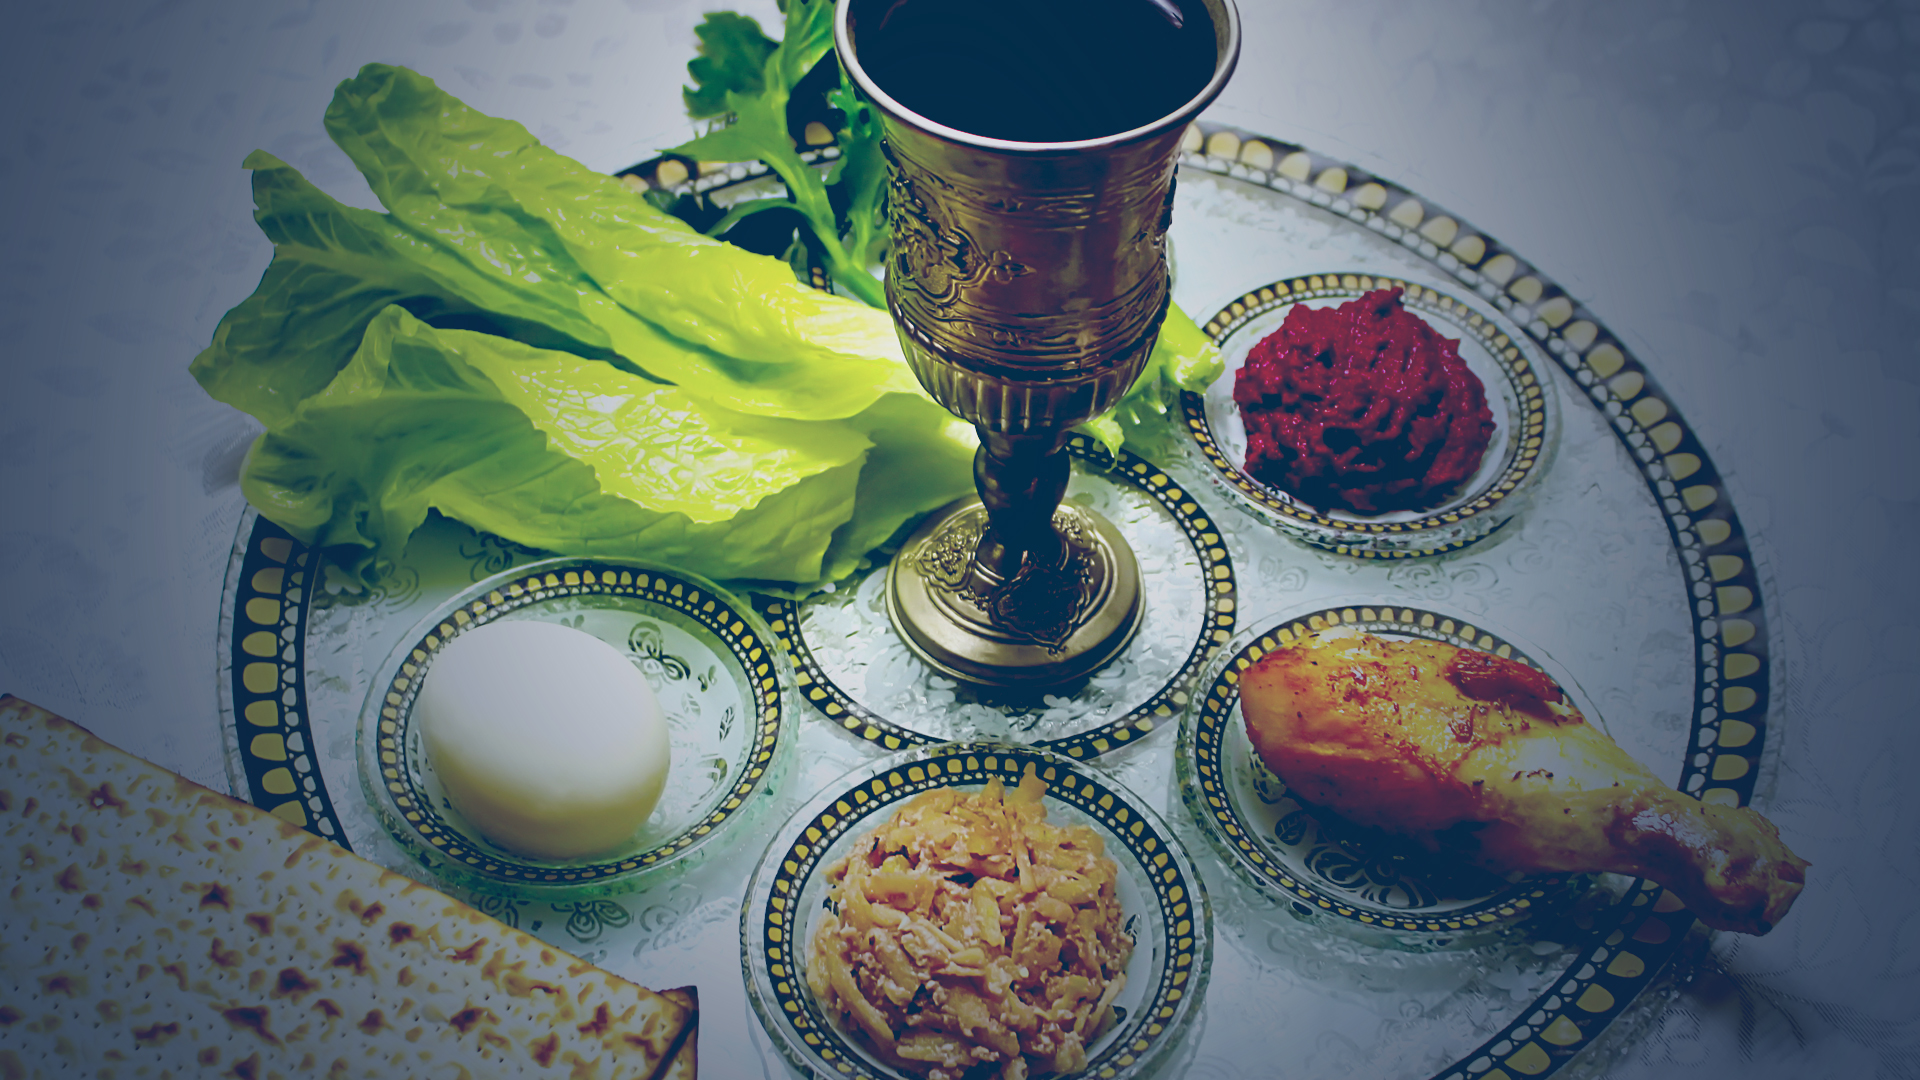 A seder plate and invitation to join Bnai Shalom for Passover on April 16, 2022 at 5:00 P.M. - Make reservations today.